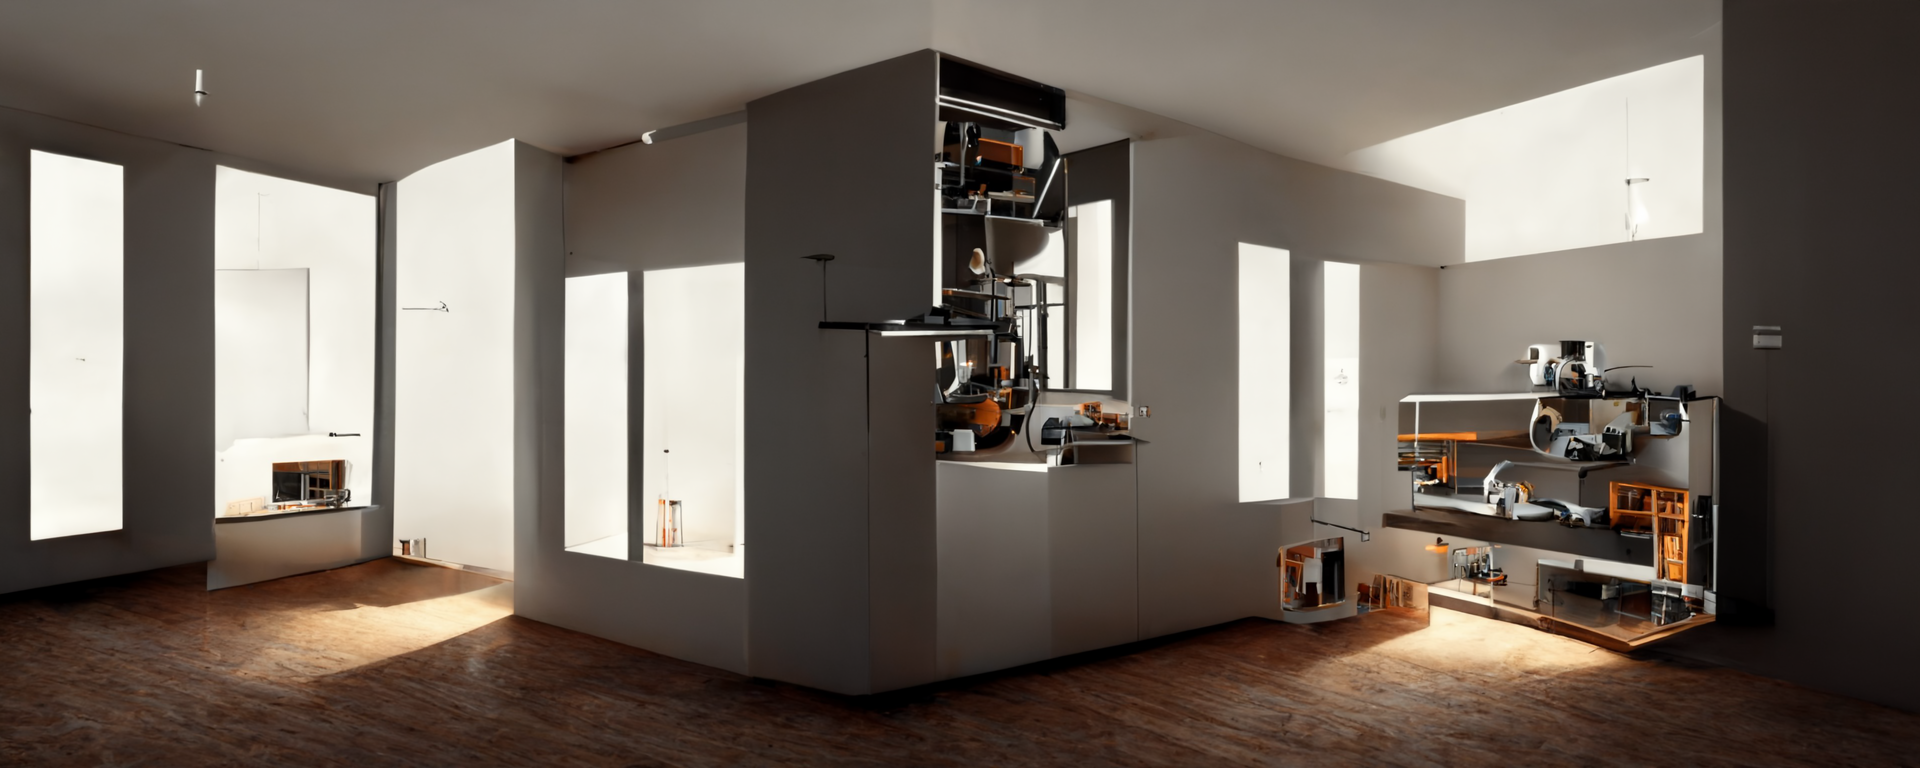 The factory: imagery of a smart home automated by small devices scattered across a living room